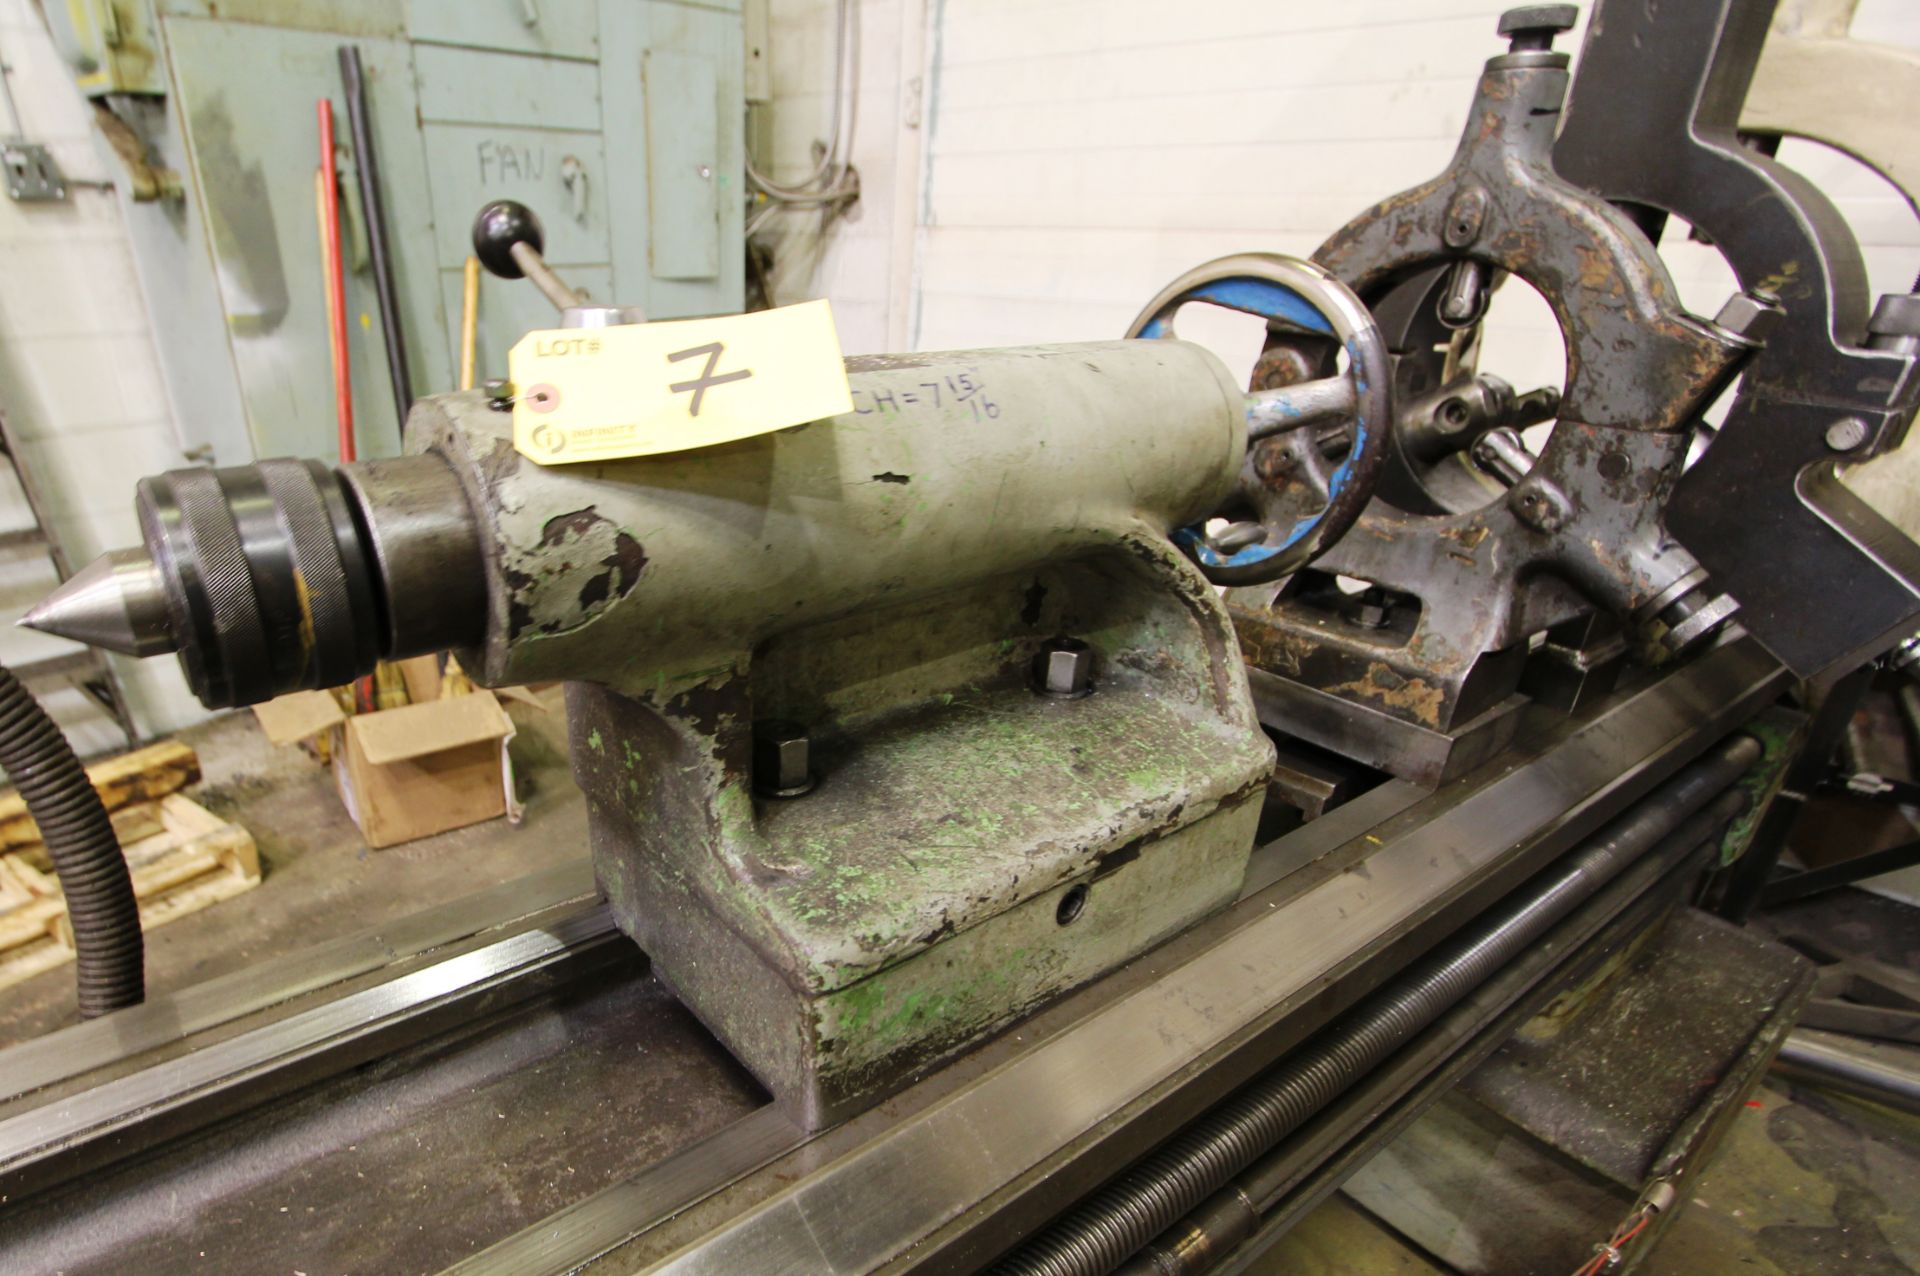 SIRCO PA-24 Engine Lathe, 24” x 144”, 3.5” Spindle Bore, Tailstock, (3) Steady Rests, 4-Jaw Chuck, - Image 5 of 8